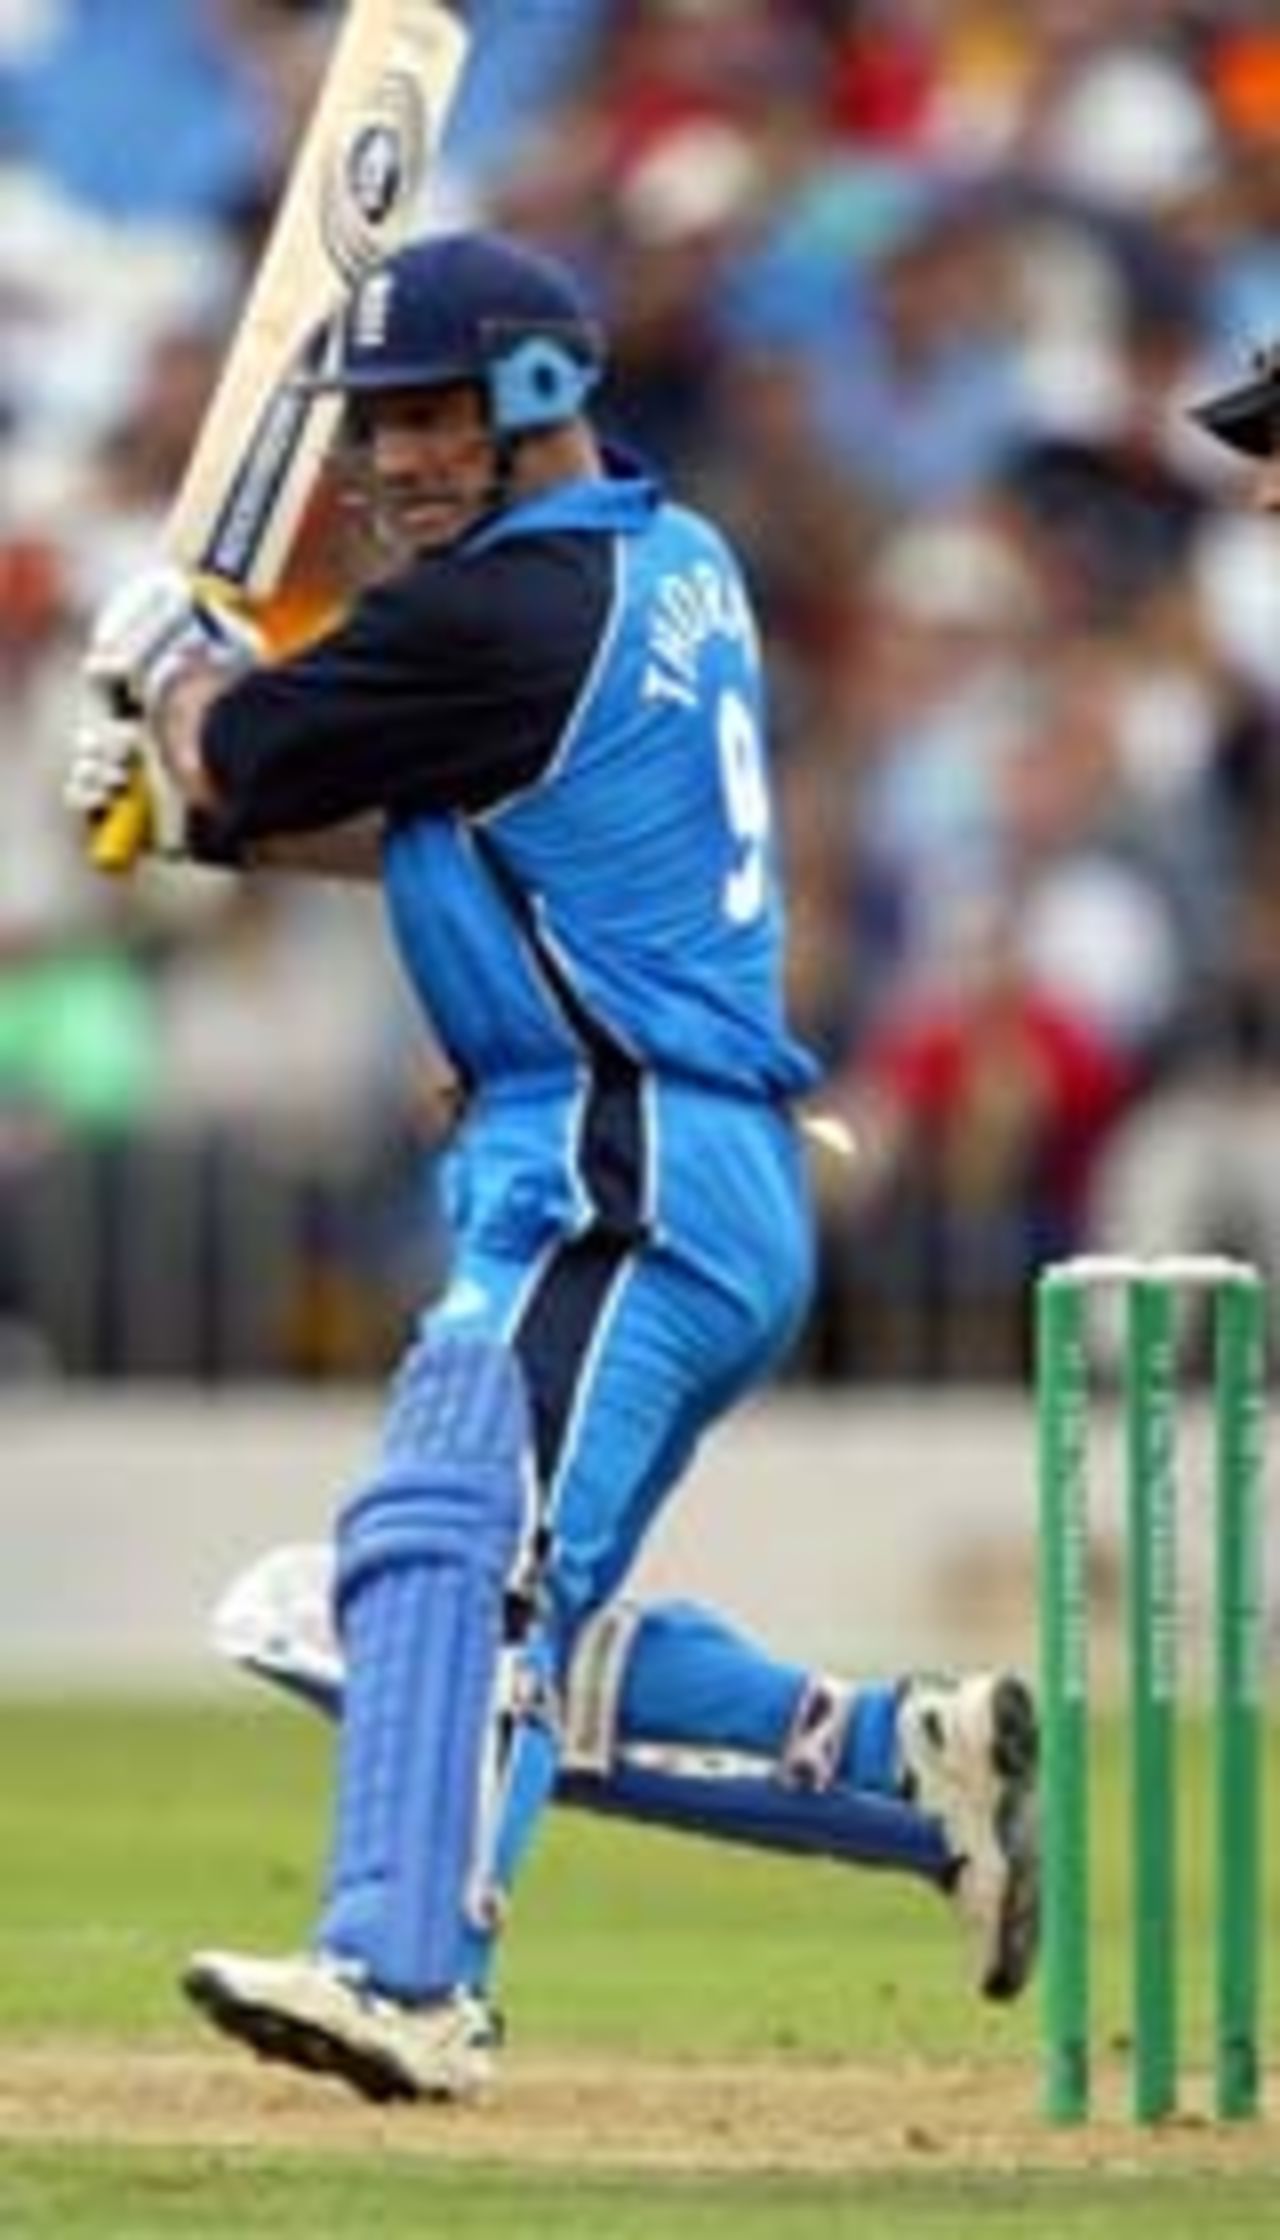 Graham Thorpe cuts a delivery during his innings of 59 not out, New Zealand v England, Auckland, February 23, 2002.